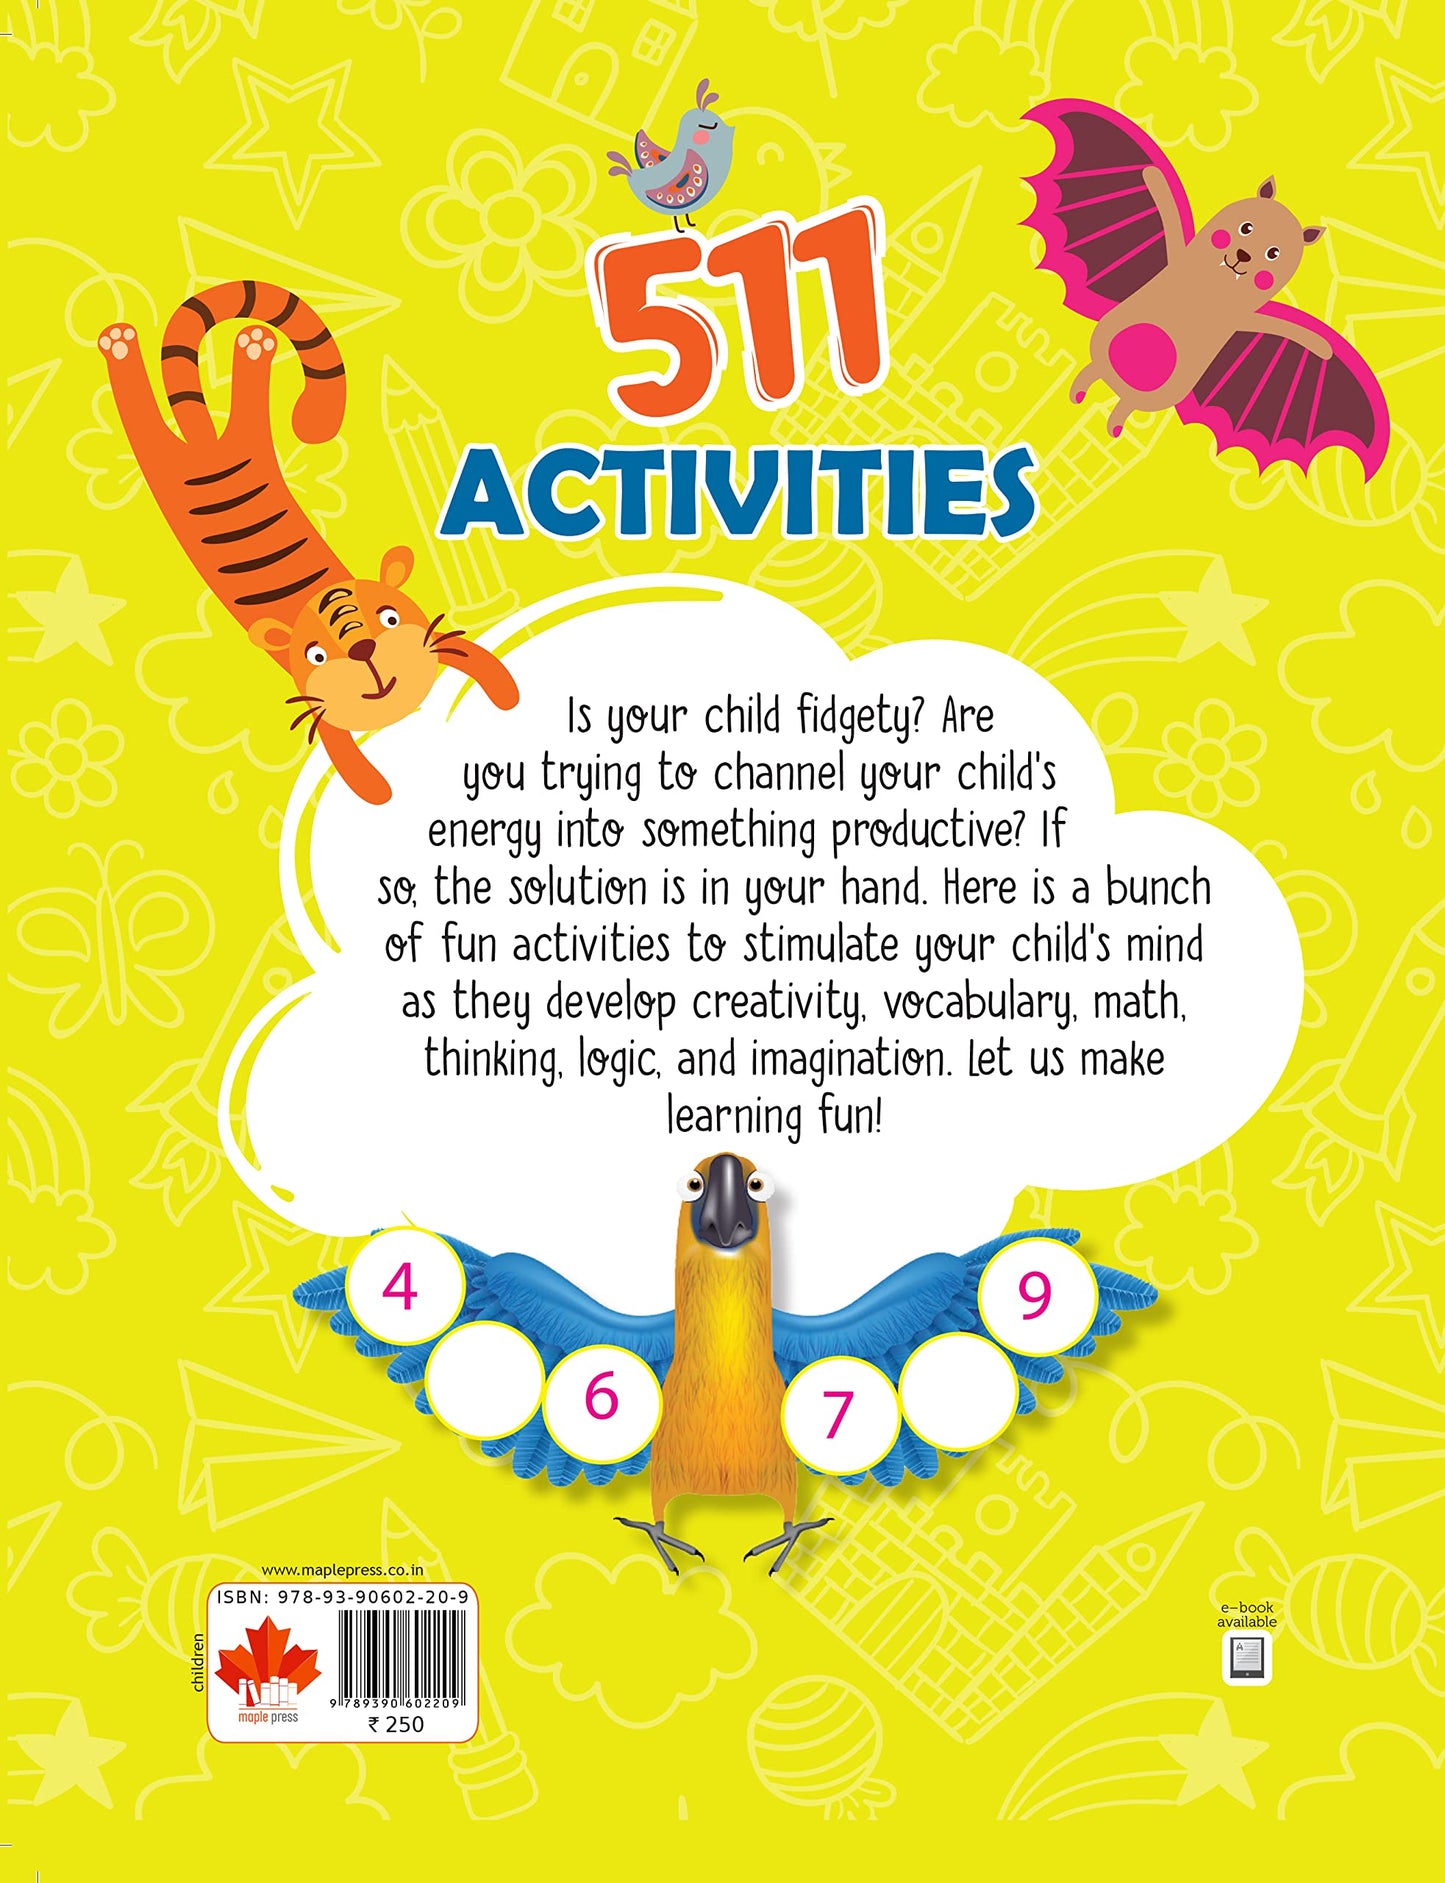 activity book for kids